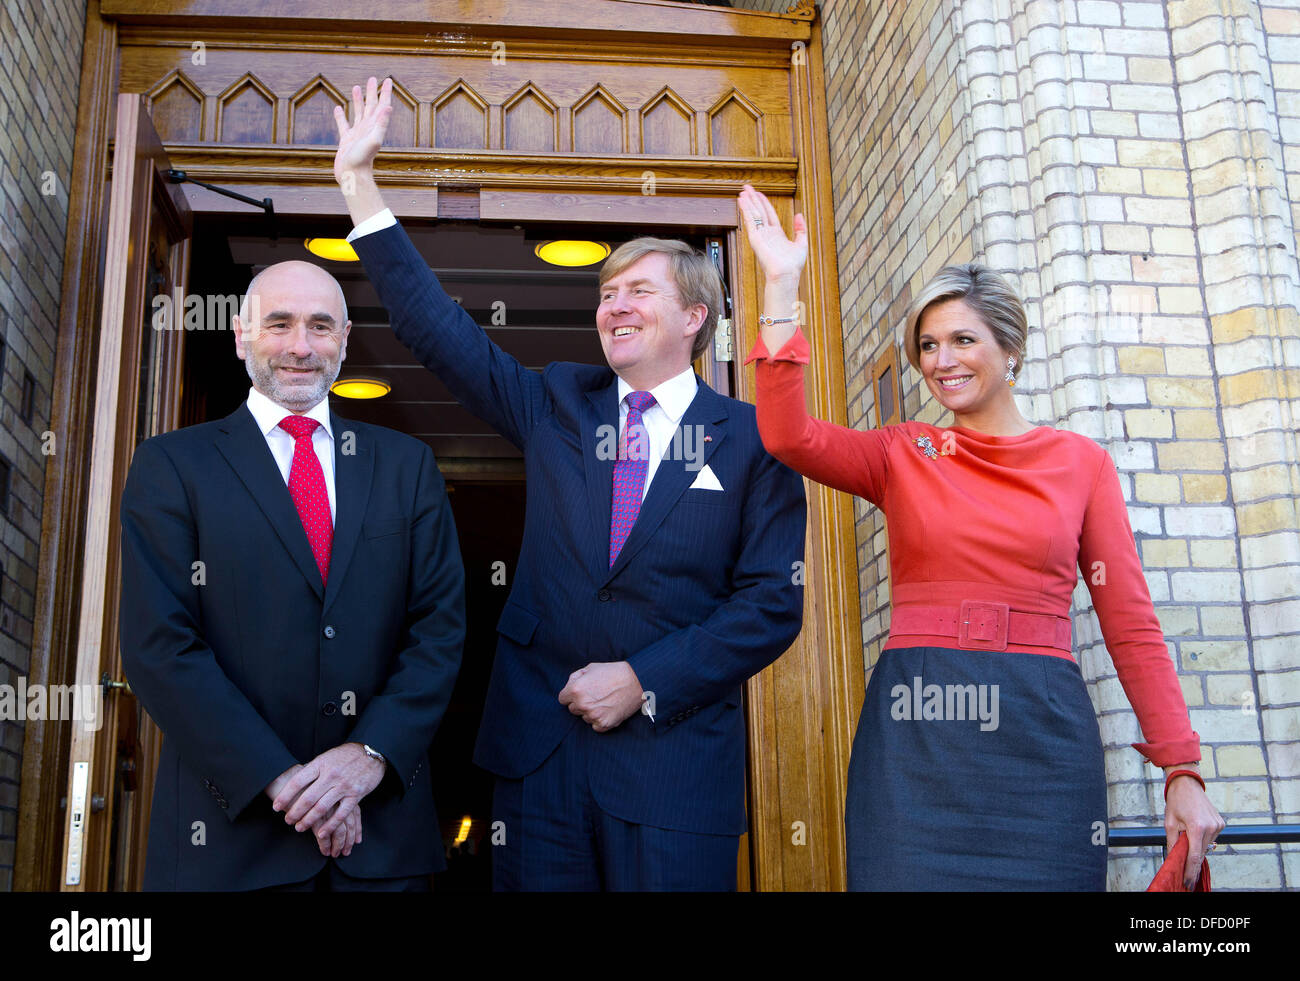 Oslo, Norway. 2nd Oct, 2013. Norwegian Parliament President Dag Terje Andersen welcomes Queen Maxima of the Netherlands and King Willem-Alexander in Oslo at the Parlament at a introduction visit to Norway. OSLO 2 October 2013 Photo: Albert Nieboer/dpa/Alamy Live News Stock Photo